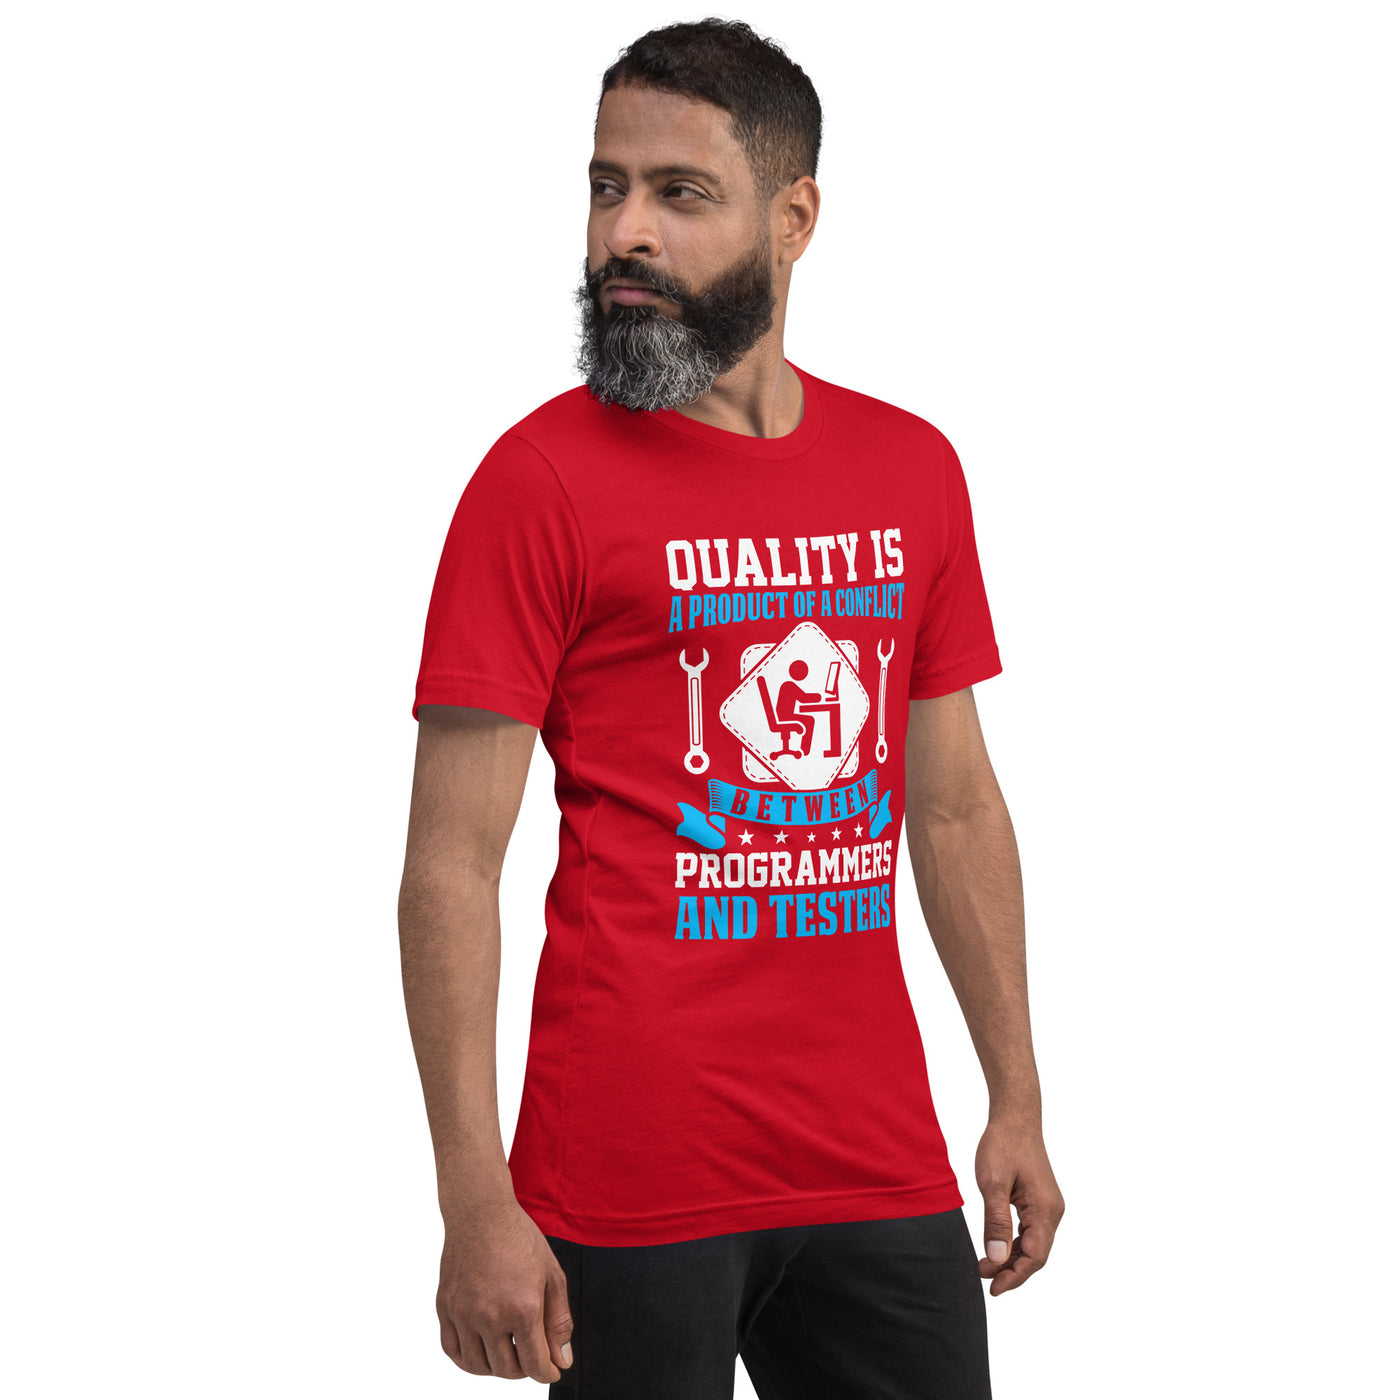 Quality is a Product of a conflict -Unisex t-shirt